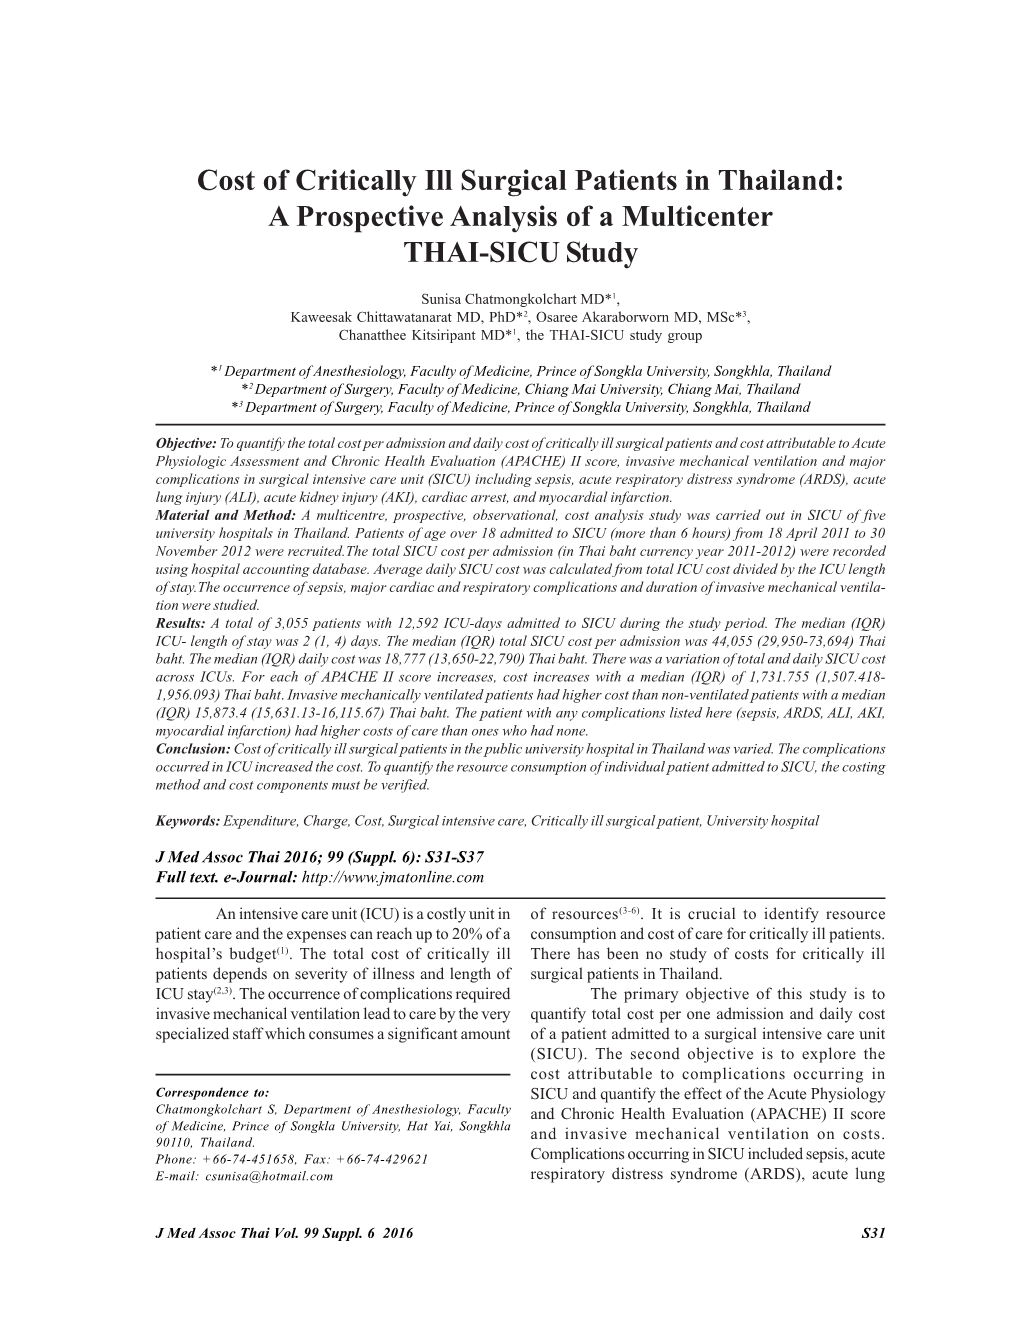 Cost of Critically Ill Surgical Patients in Thailand: a Prospective Analysis of a Multicenter THAI-SICU Study